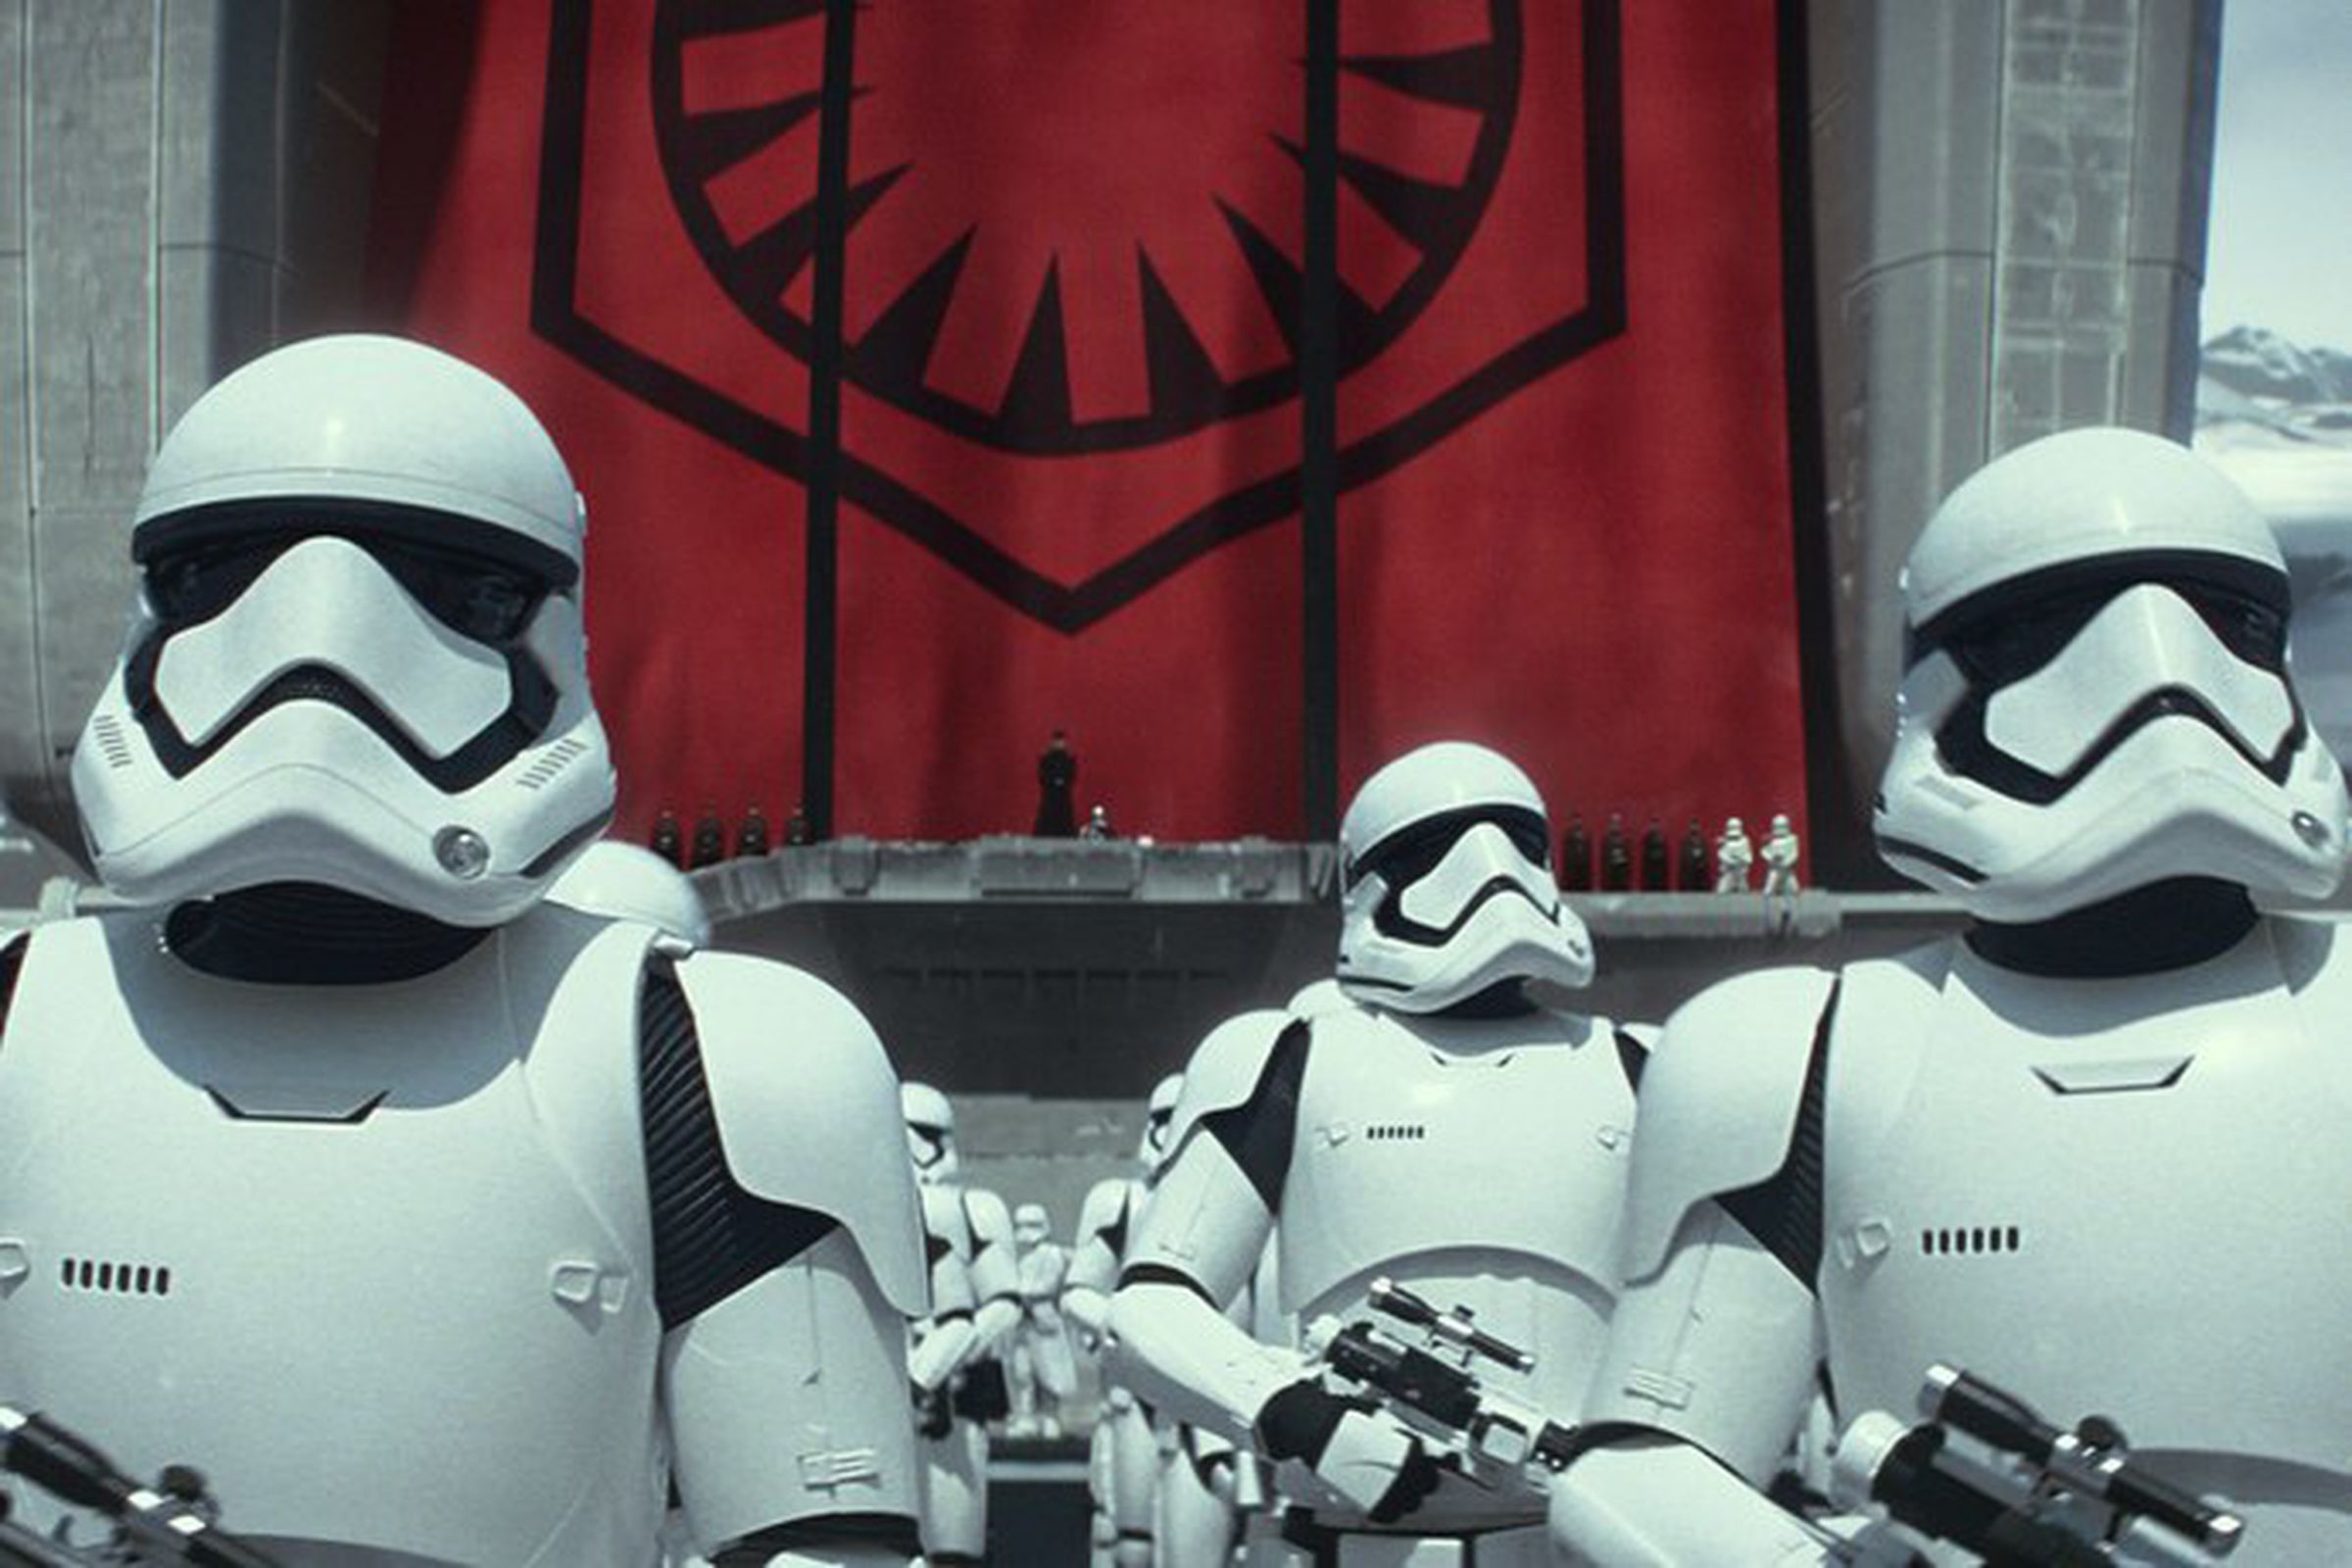 The newer First Order stormtroopers.